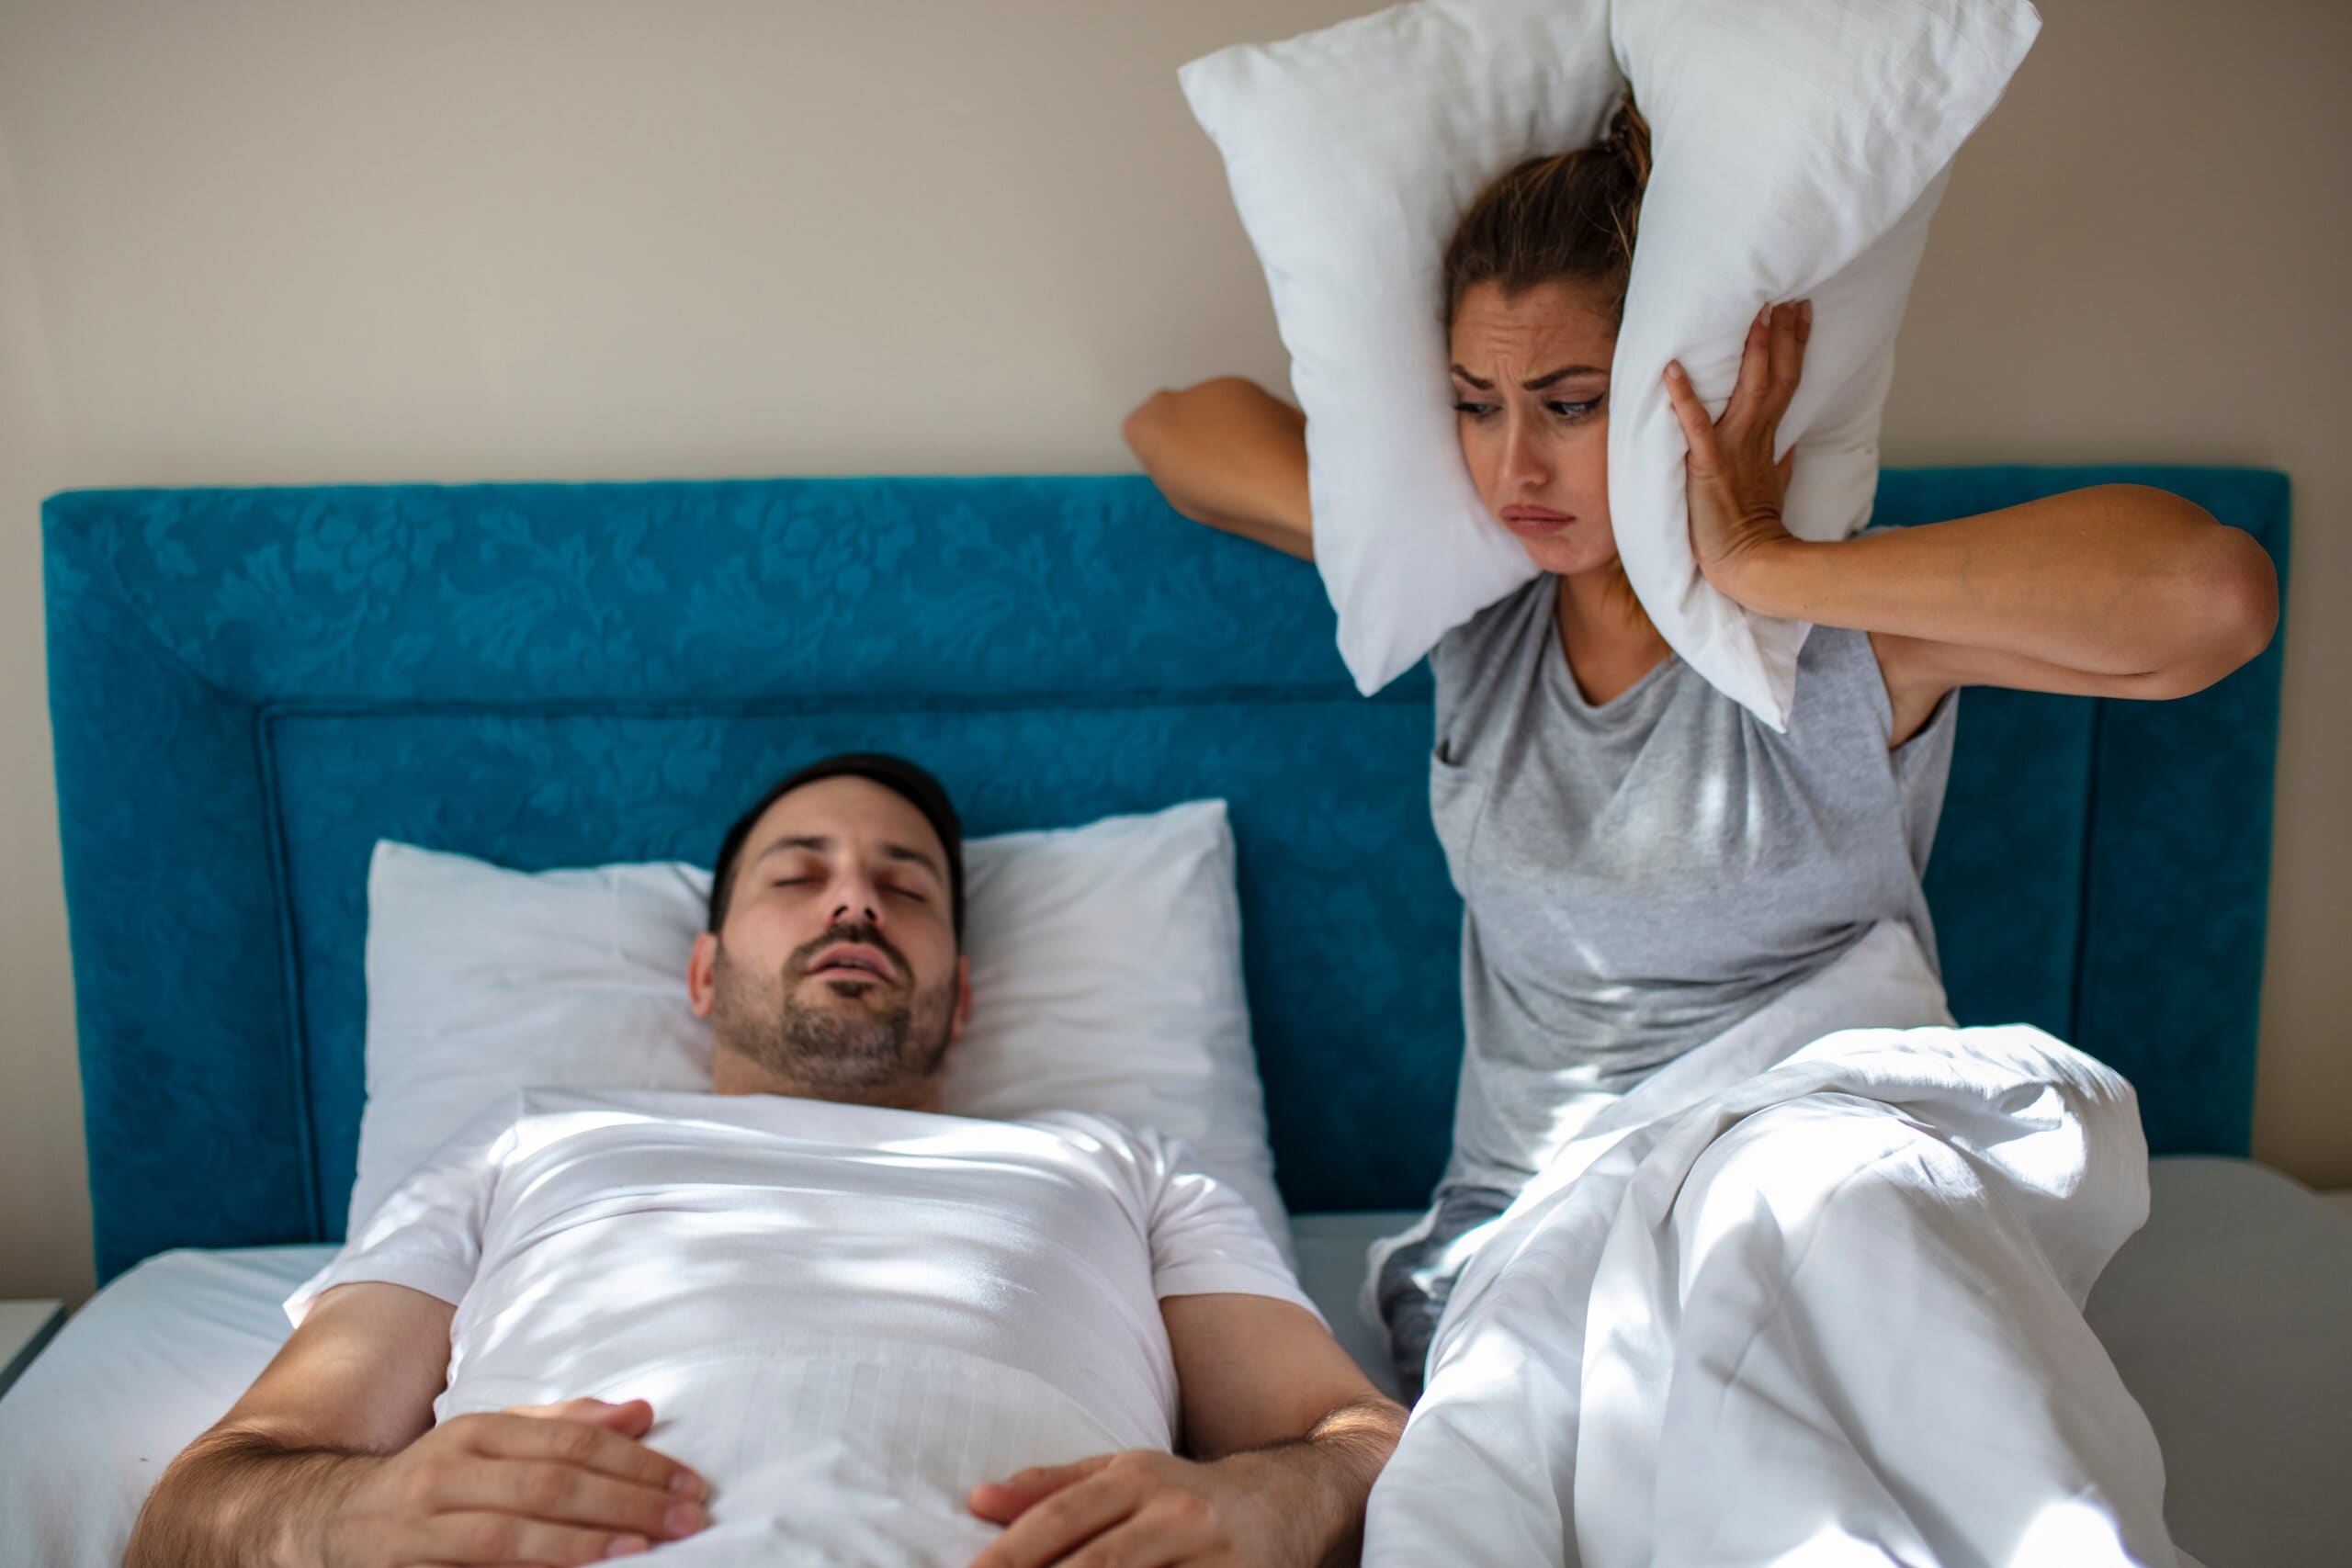 Man snoring or sleep talking, waking his partner who is holding a pillow to her ears sat up in bed next to him.